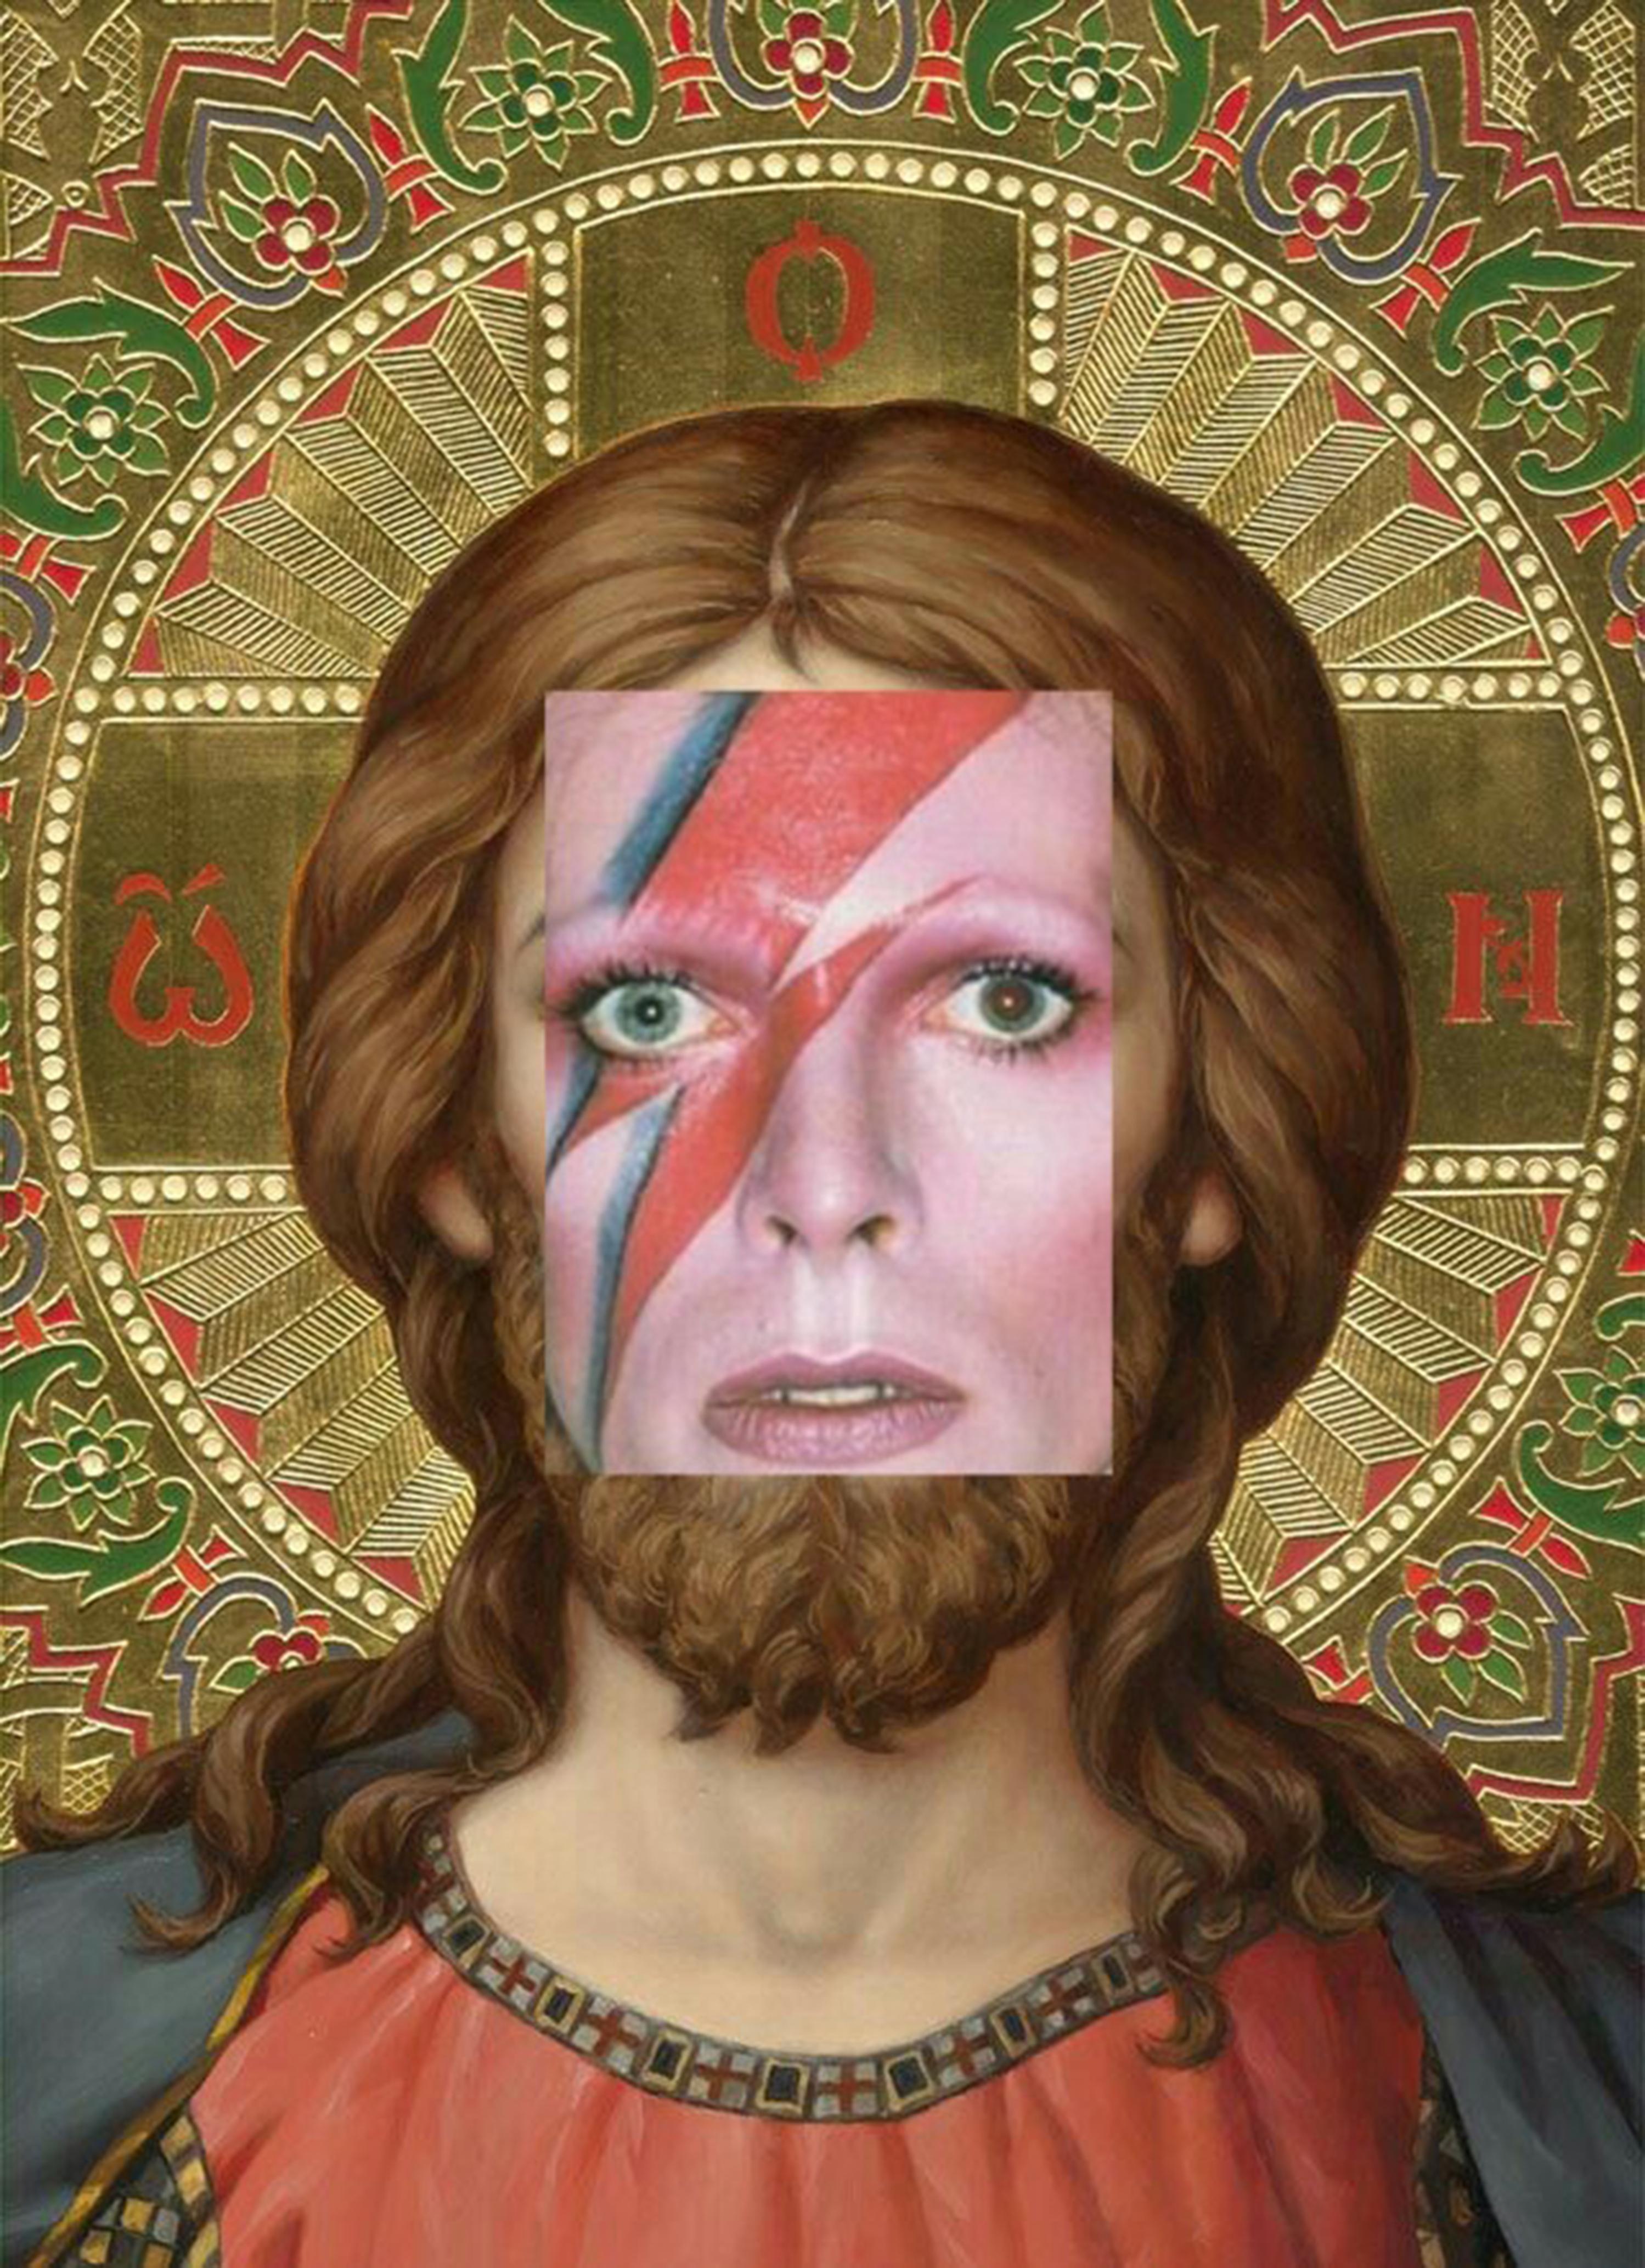 David Bowie + Byzantine Jesus Christ Digital collage print by Spanish artist Naro Pinosa, made famous in social media. Unique signed-by-artist piece. Authenticity certificated.
Print on photography papper. Glass and white lacquered wooden frame.